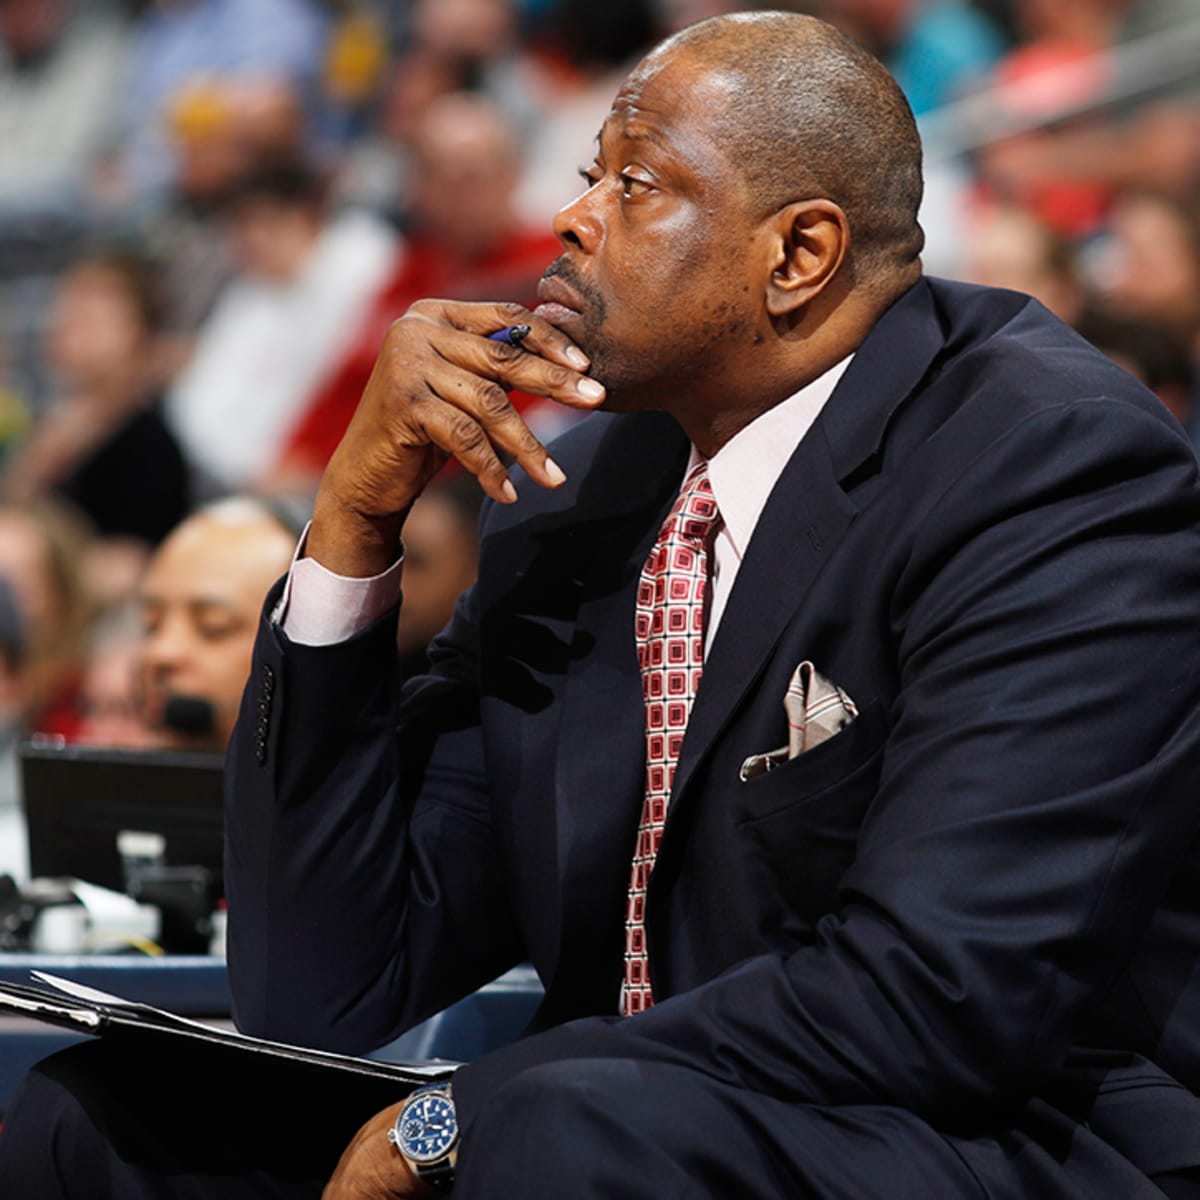 Georgetown Hires Patrick Ewing as Men's Basketball Coach - The New York  Times